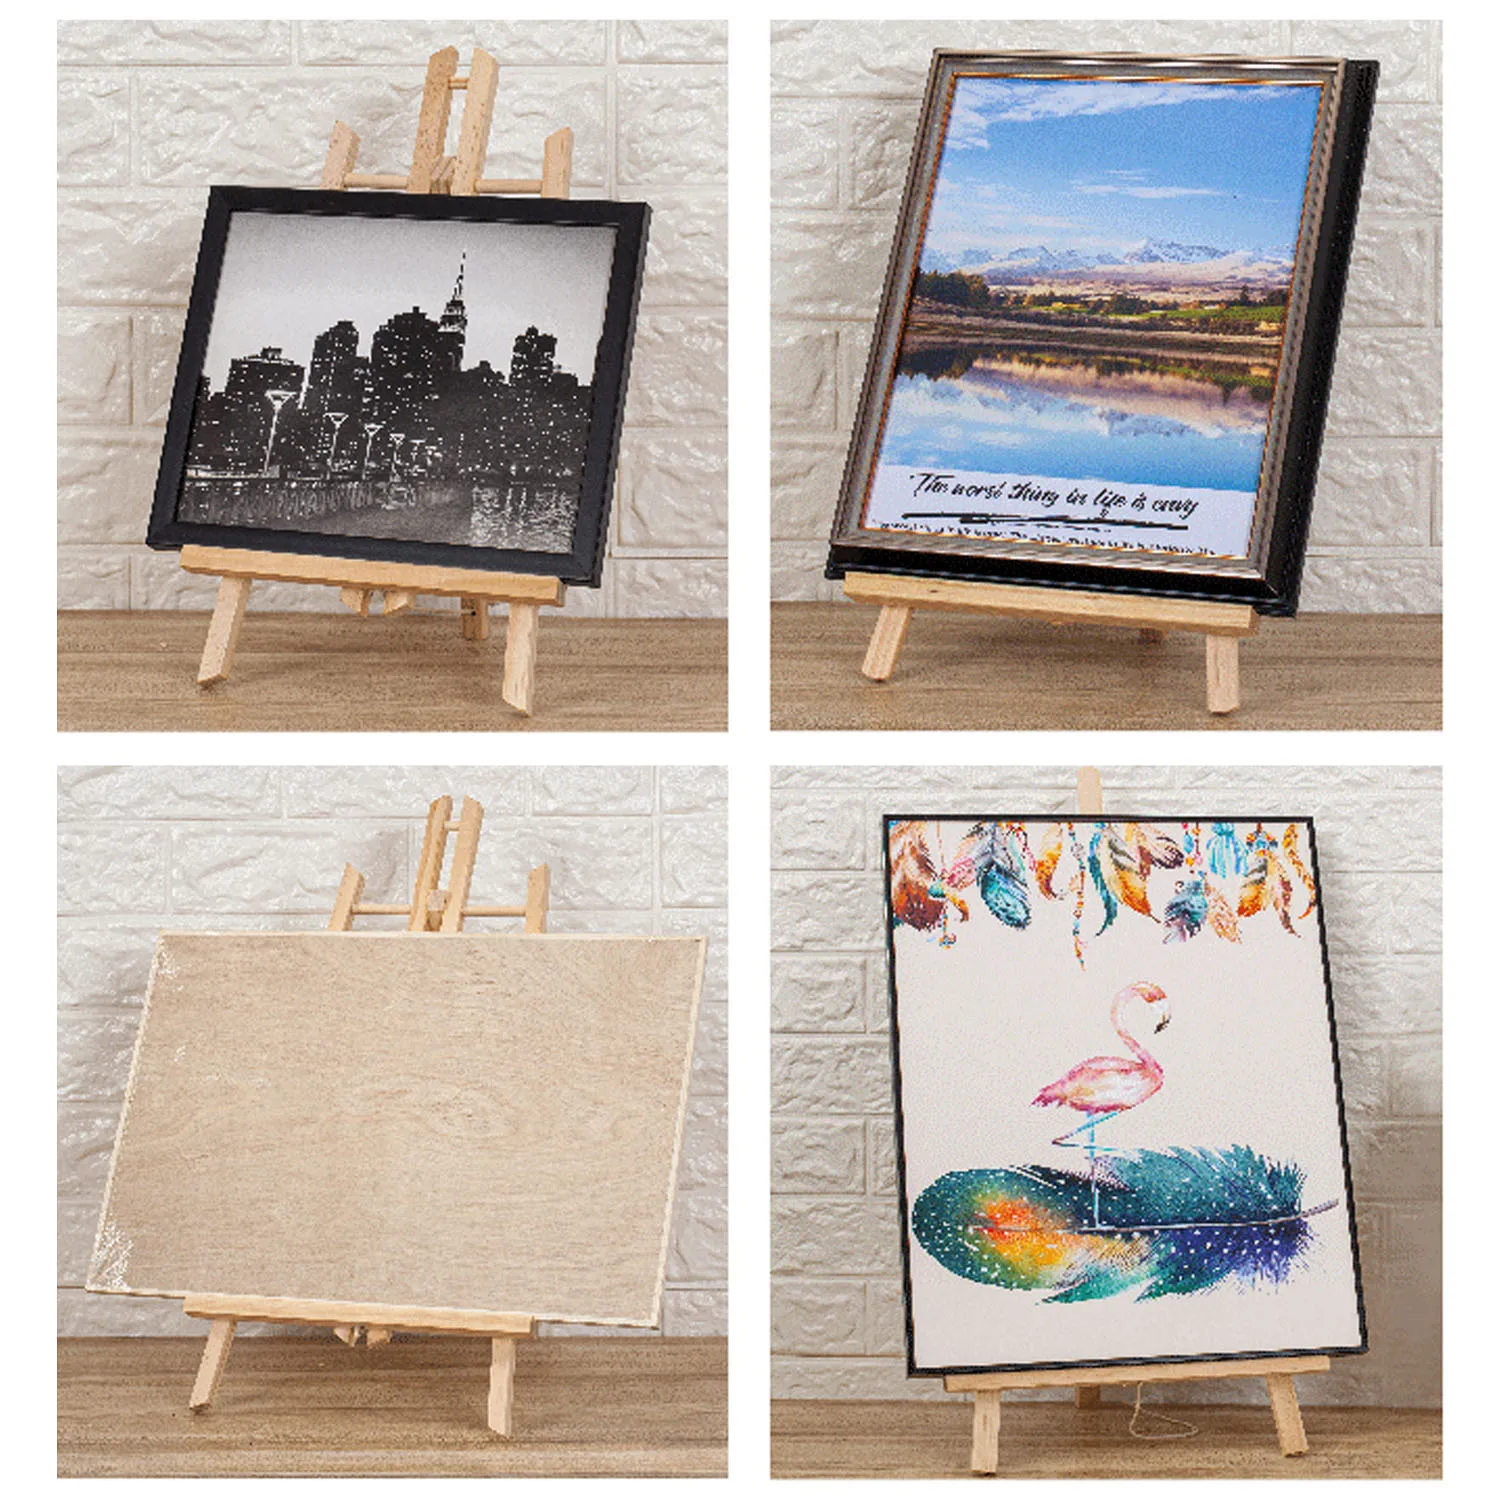 30/40/50cm Portable Wooden Easel Display Shelf Holder Stand for Artist Painting Sketching DIY Arts Photo Cards Displaying